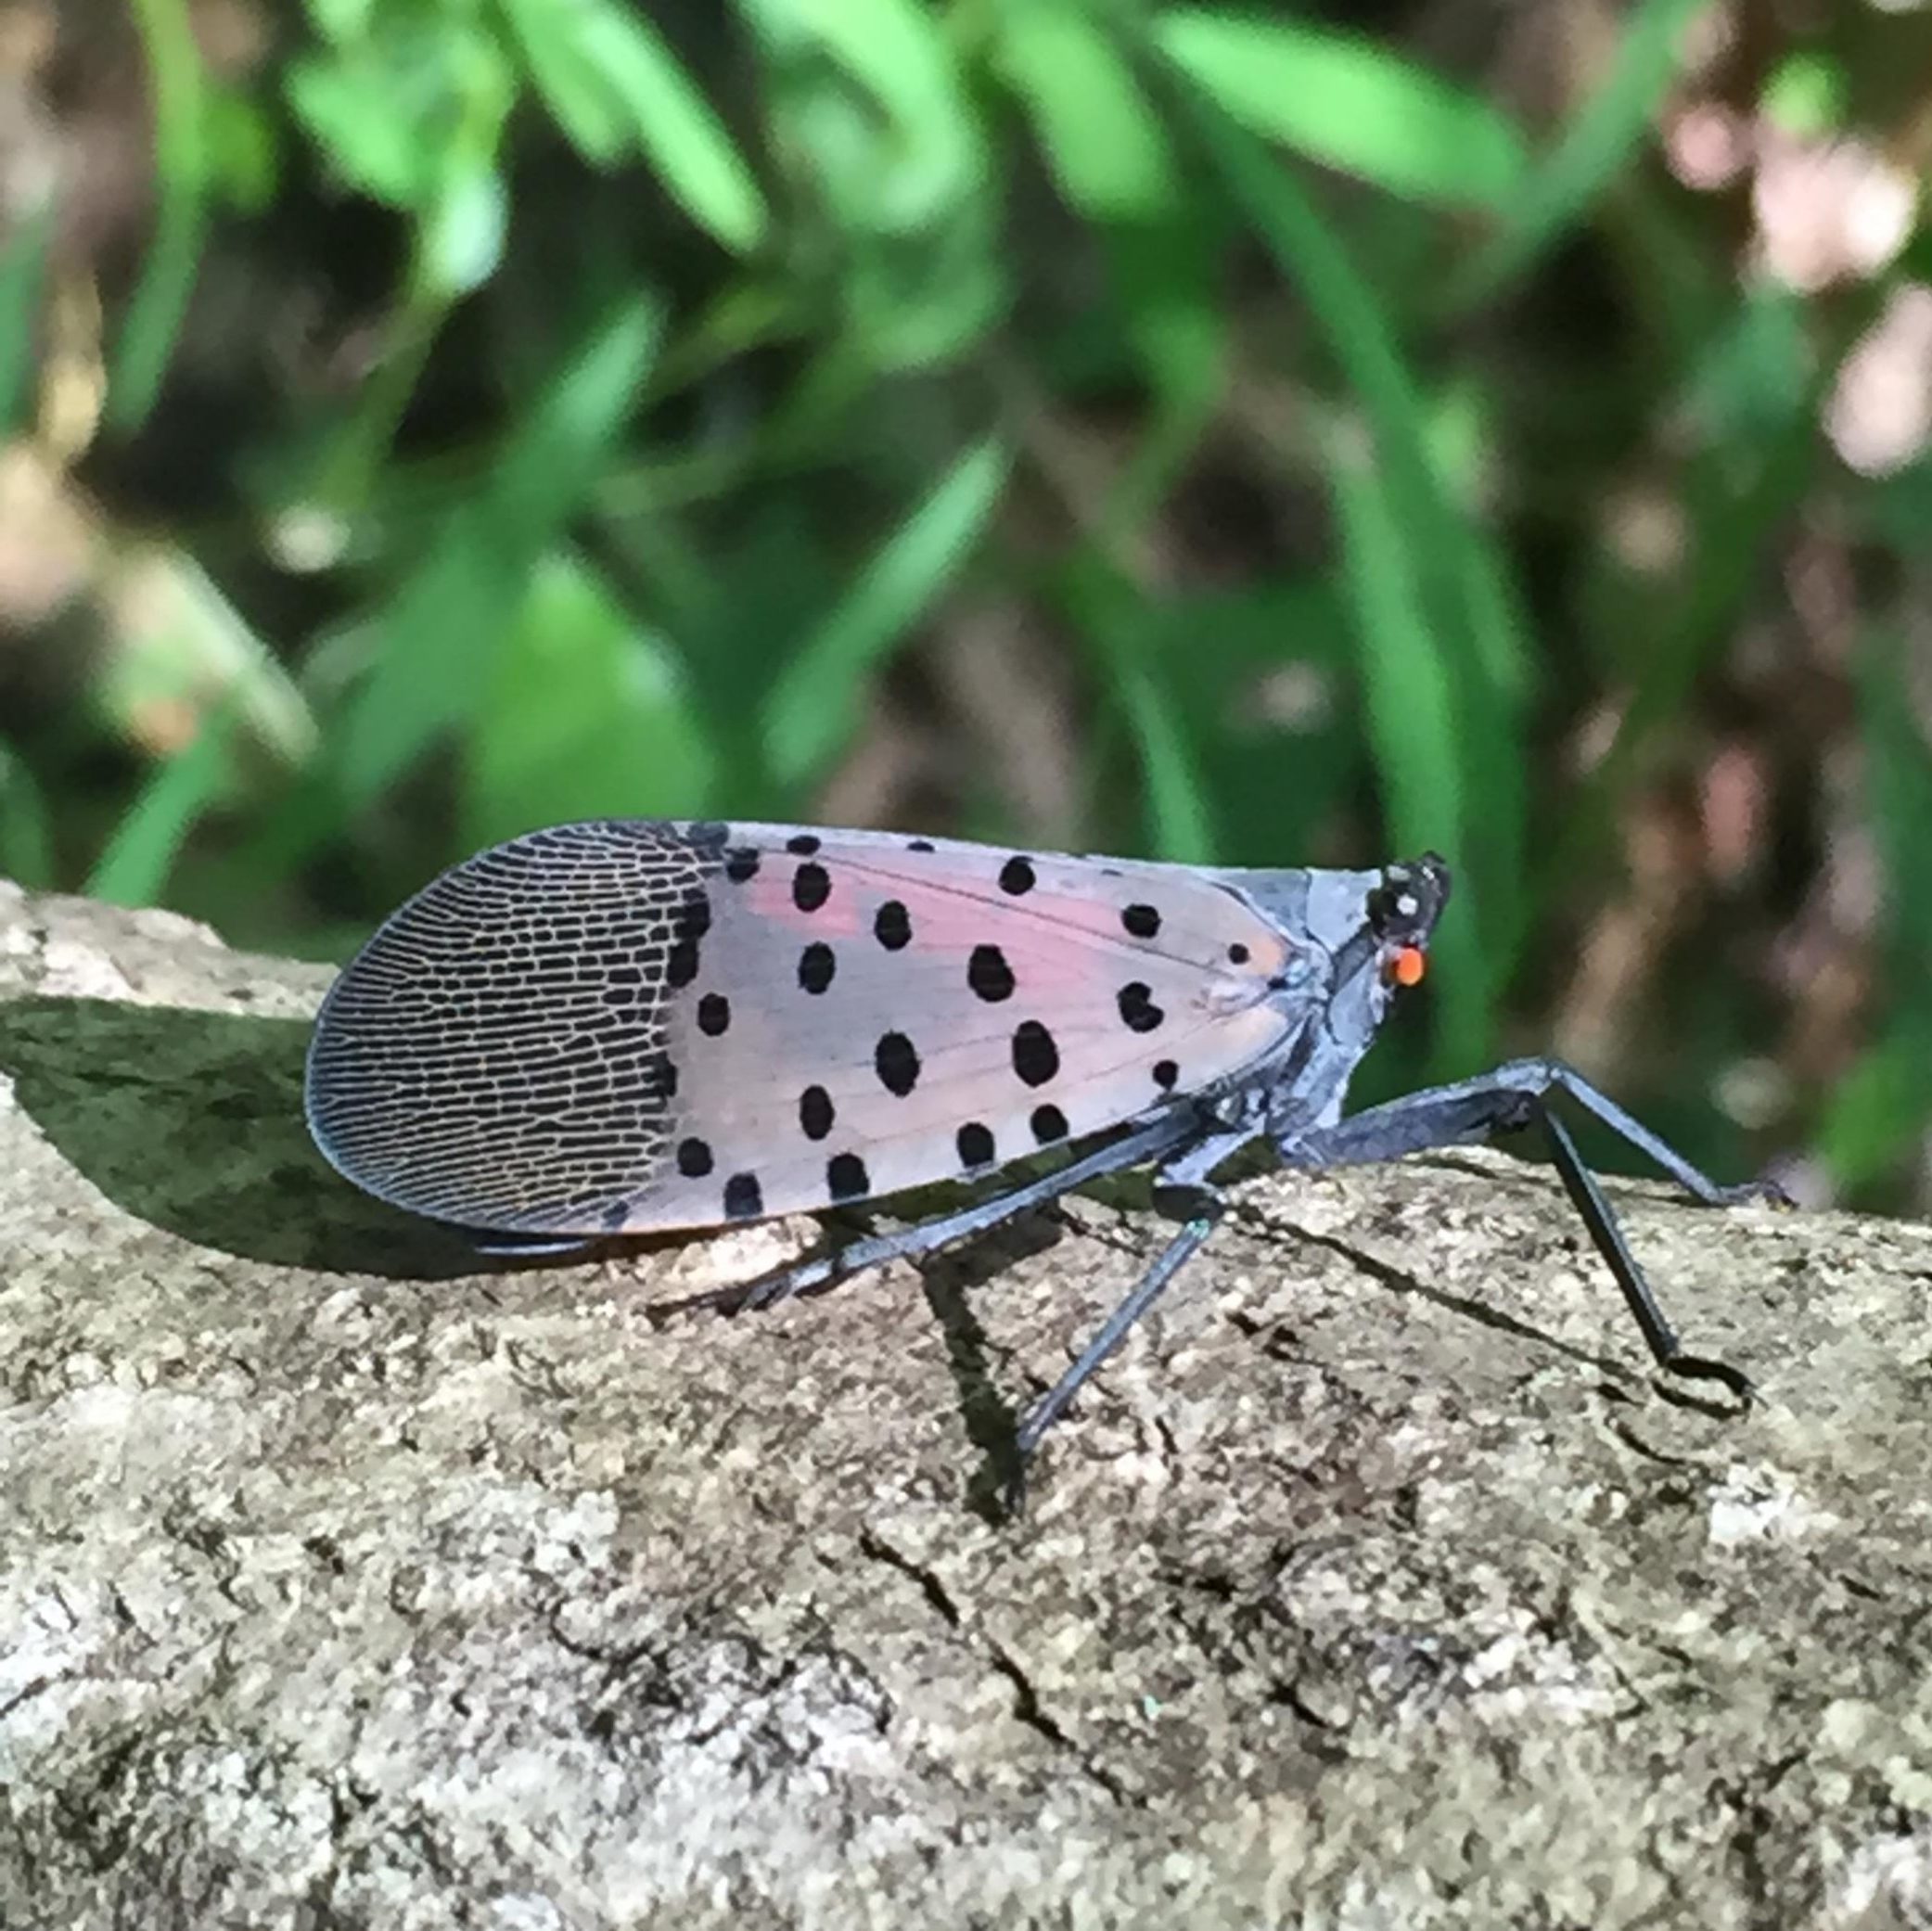 Adult spotted lanternfly